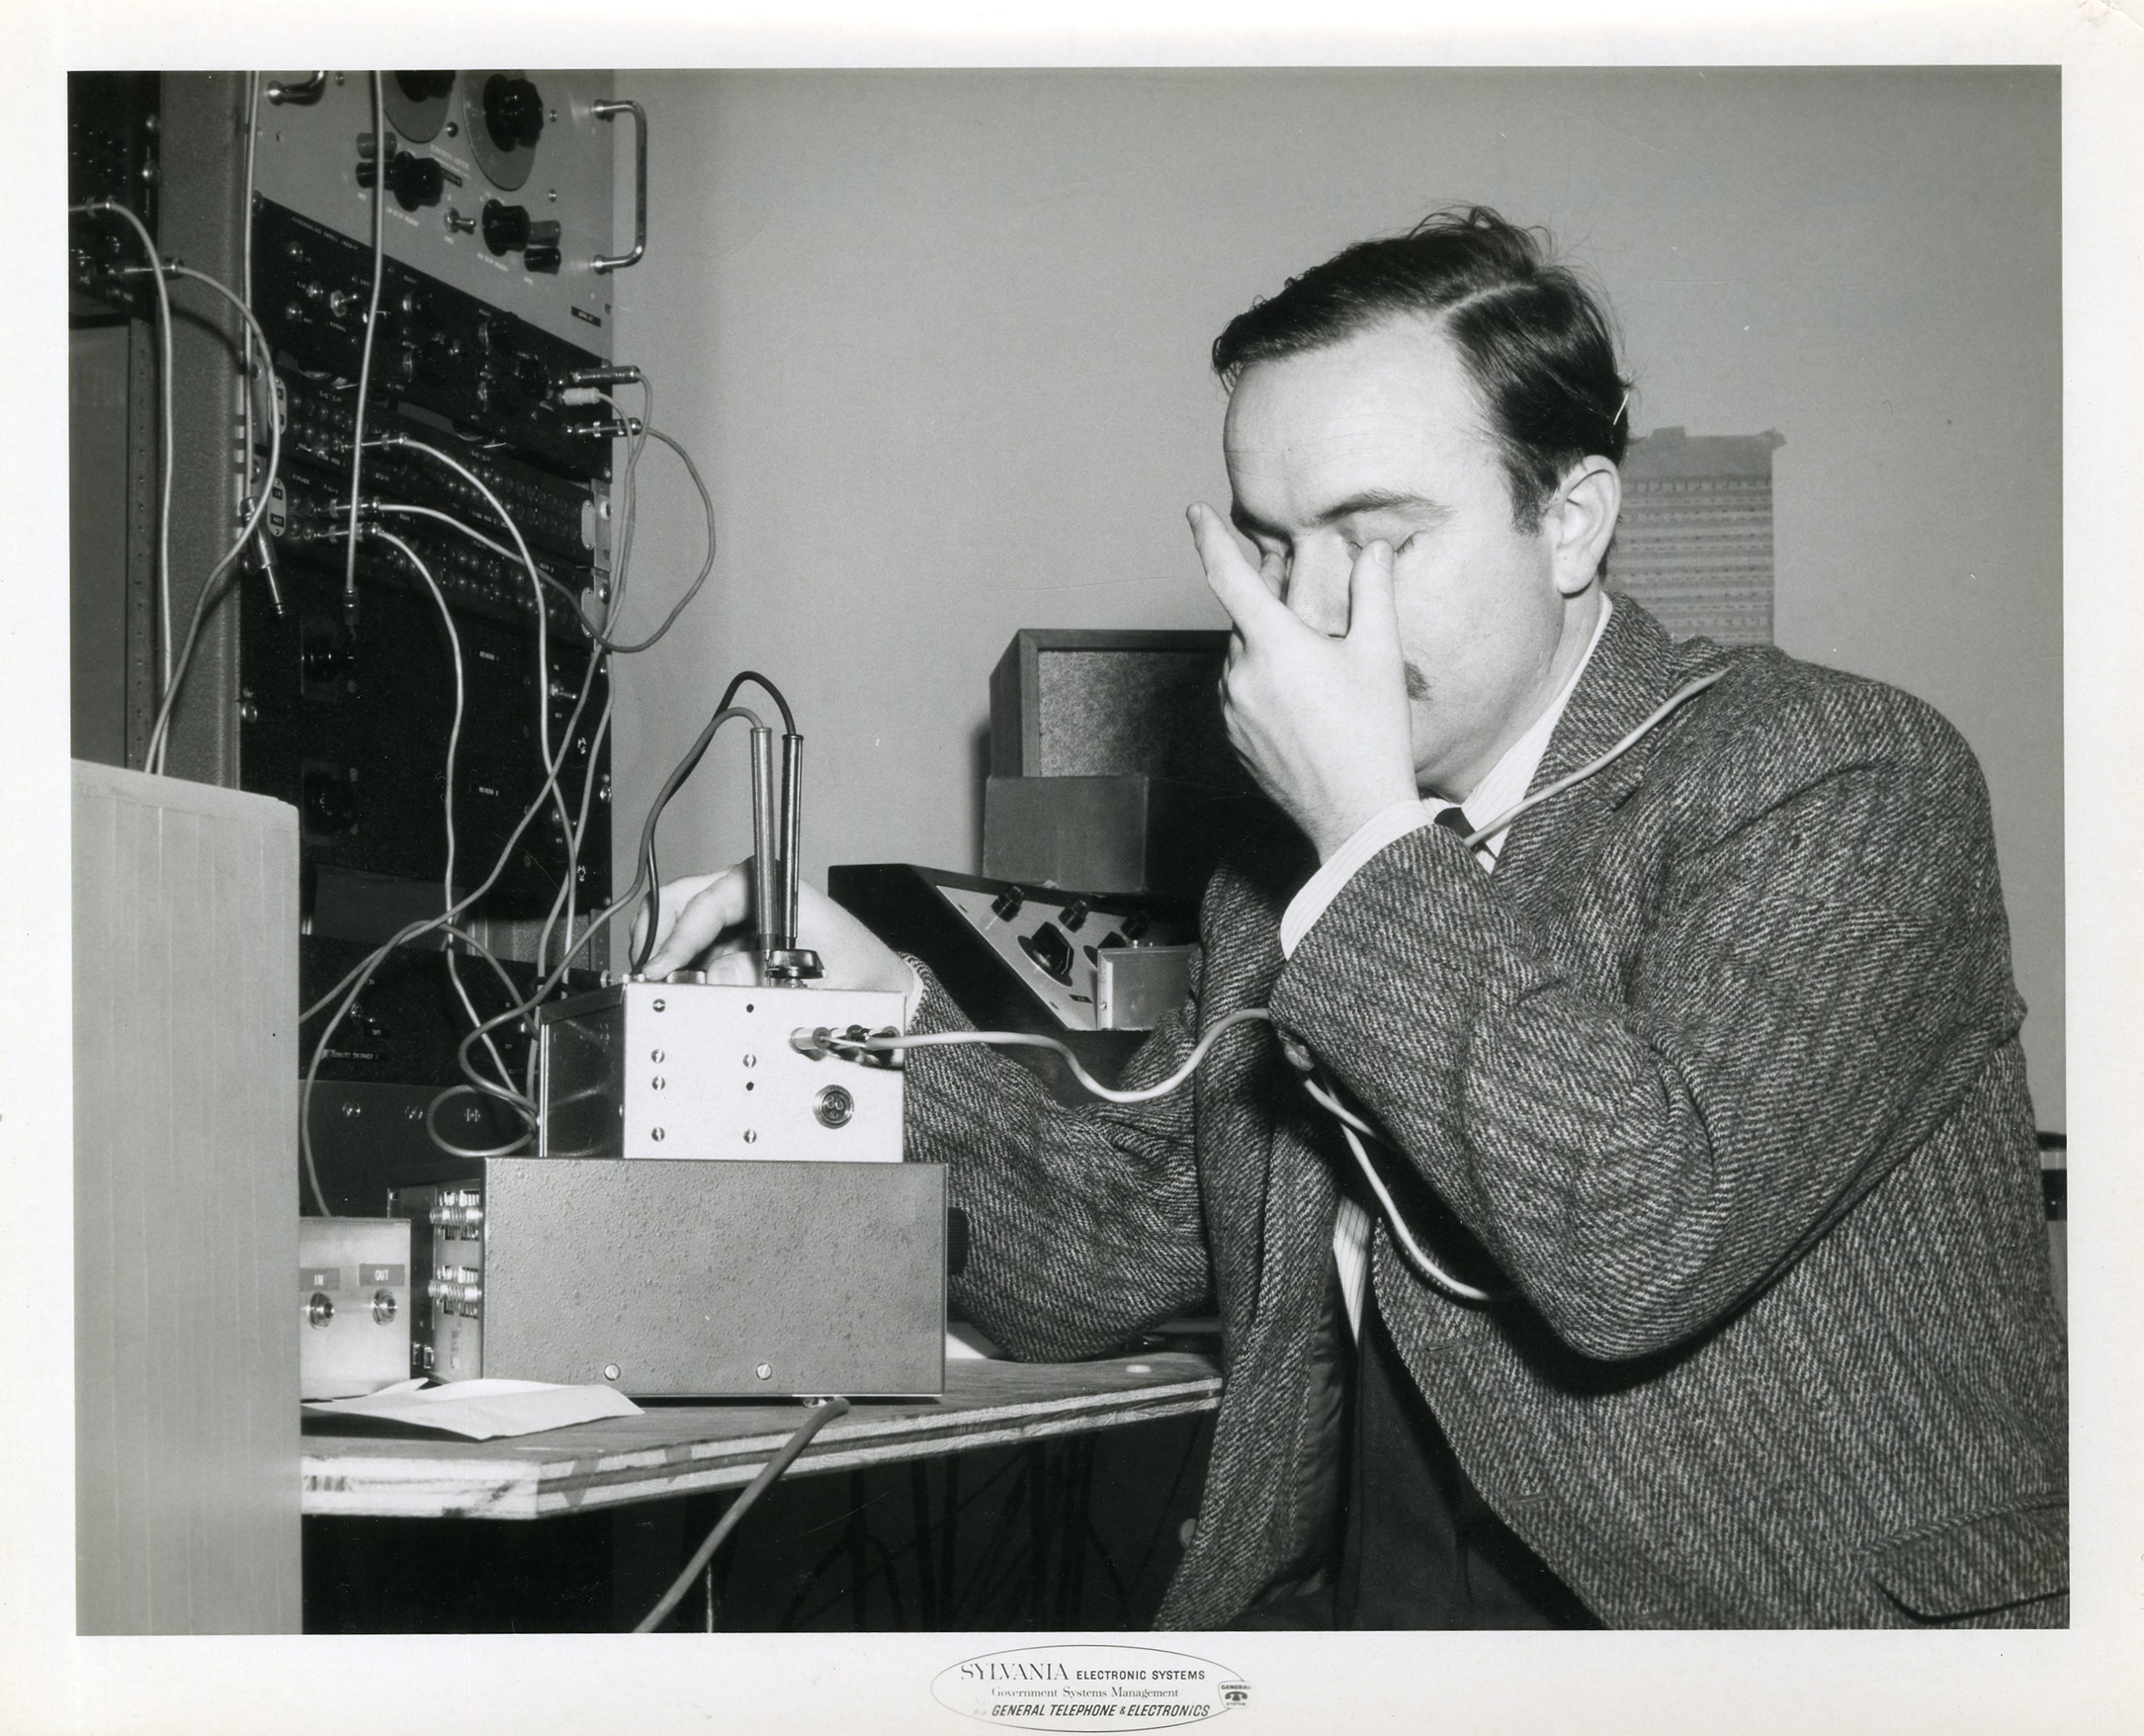 <p>Alvin Lucier practicing brainwave control in the Brandeis Electronic Music Studio, in preparation for Music for Solo Performer, 1965. Image courtesy of Alvin Lucier.</p>